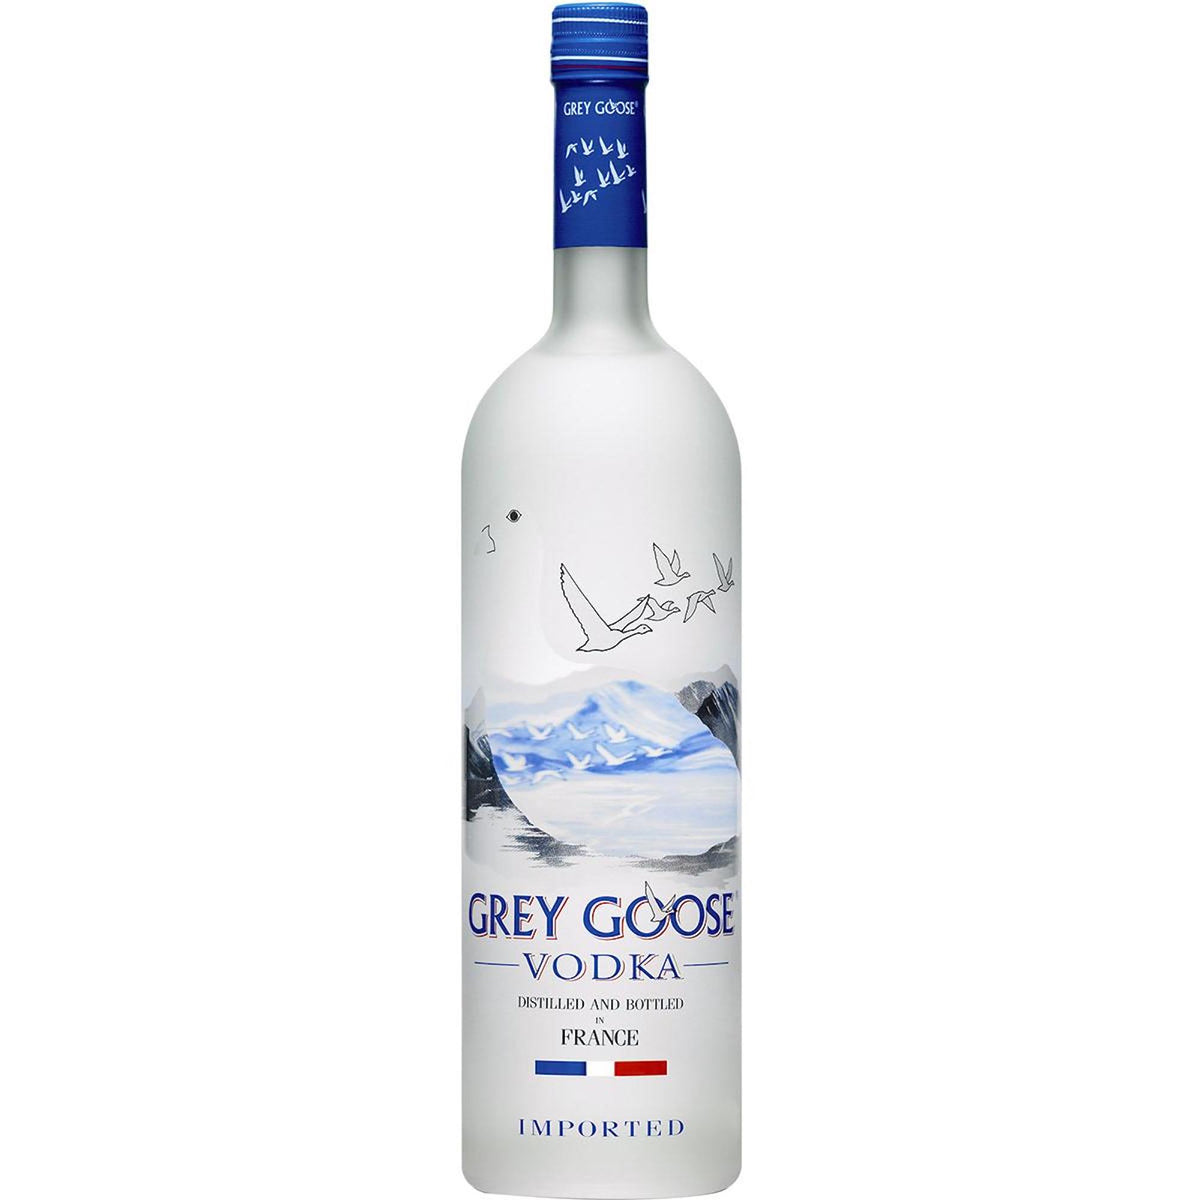 I just feel like this Grey Goose bottle is at the perfect level